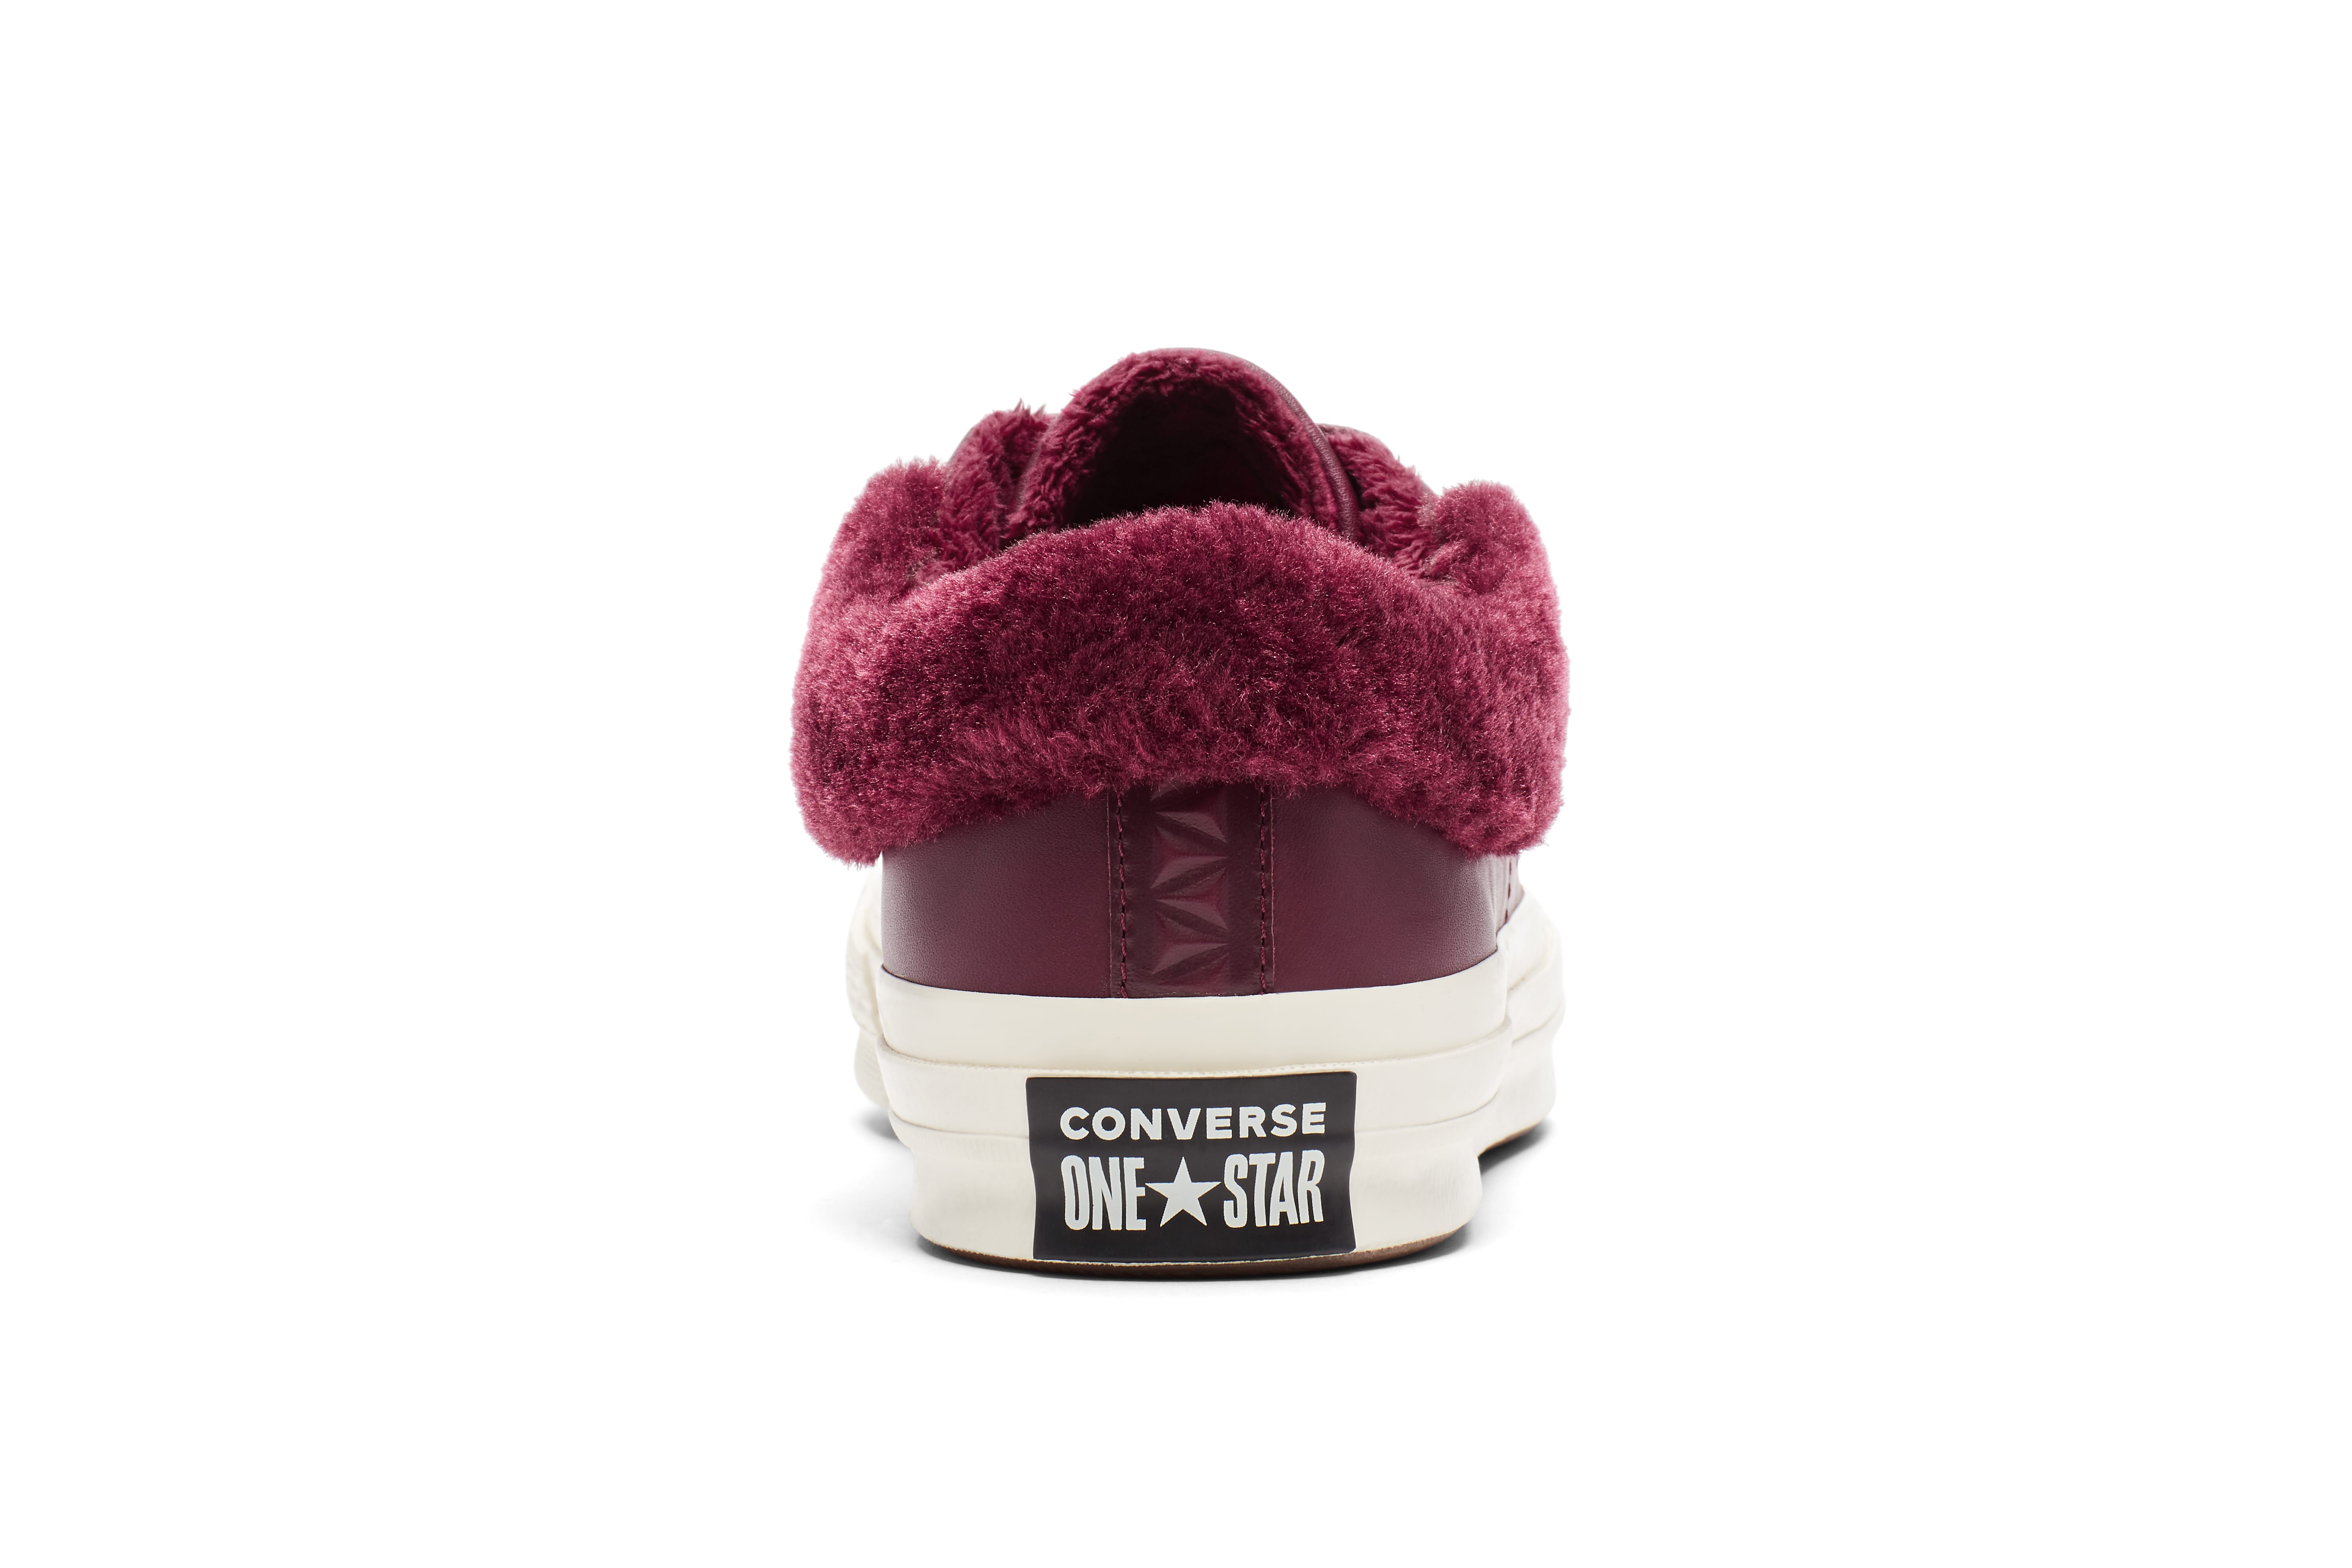 Converse One Star Fur-Lined Maroon and 